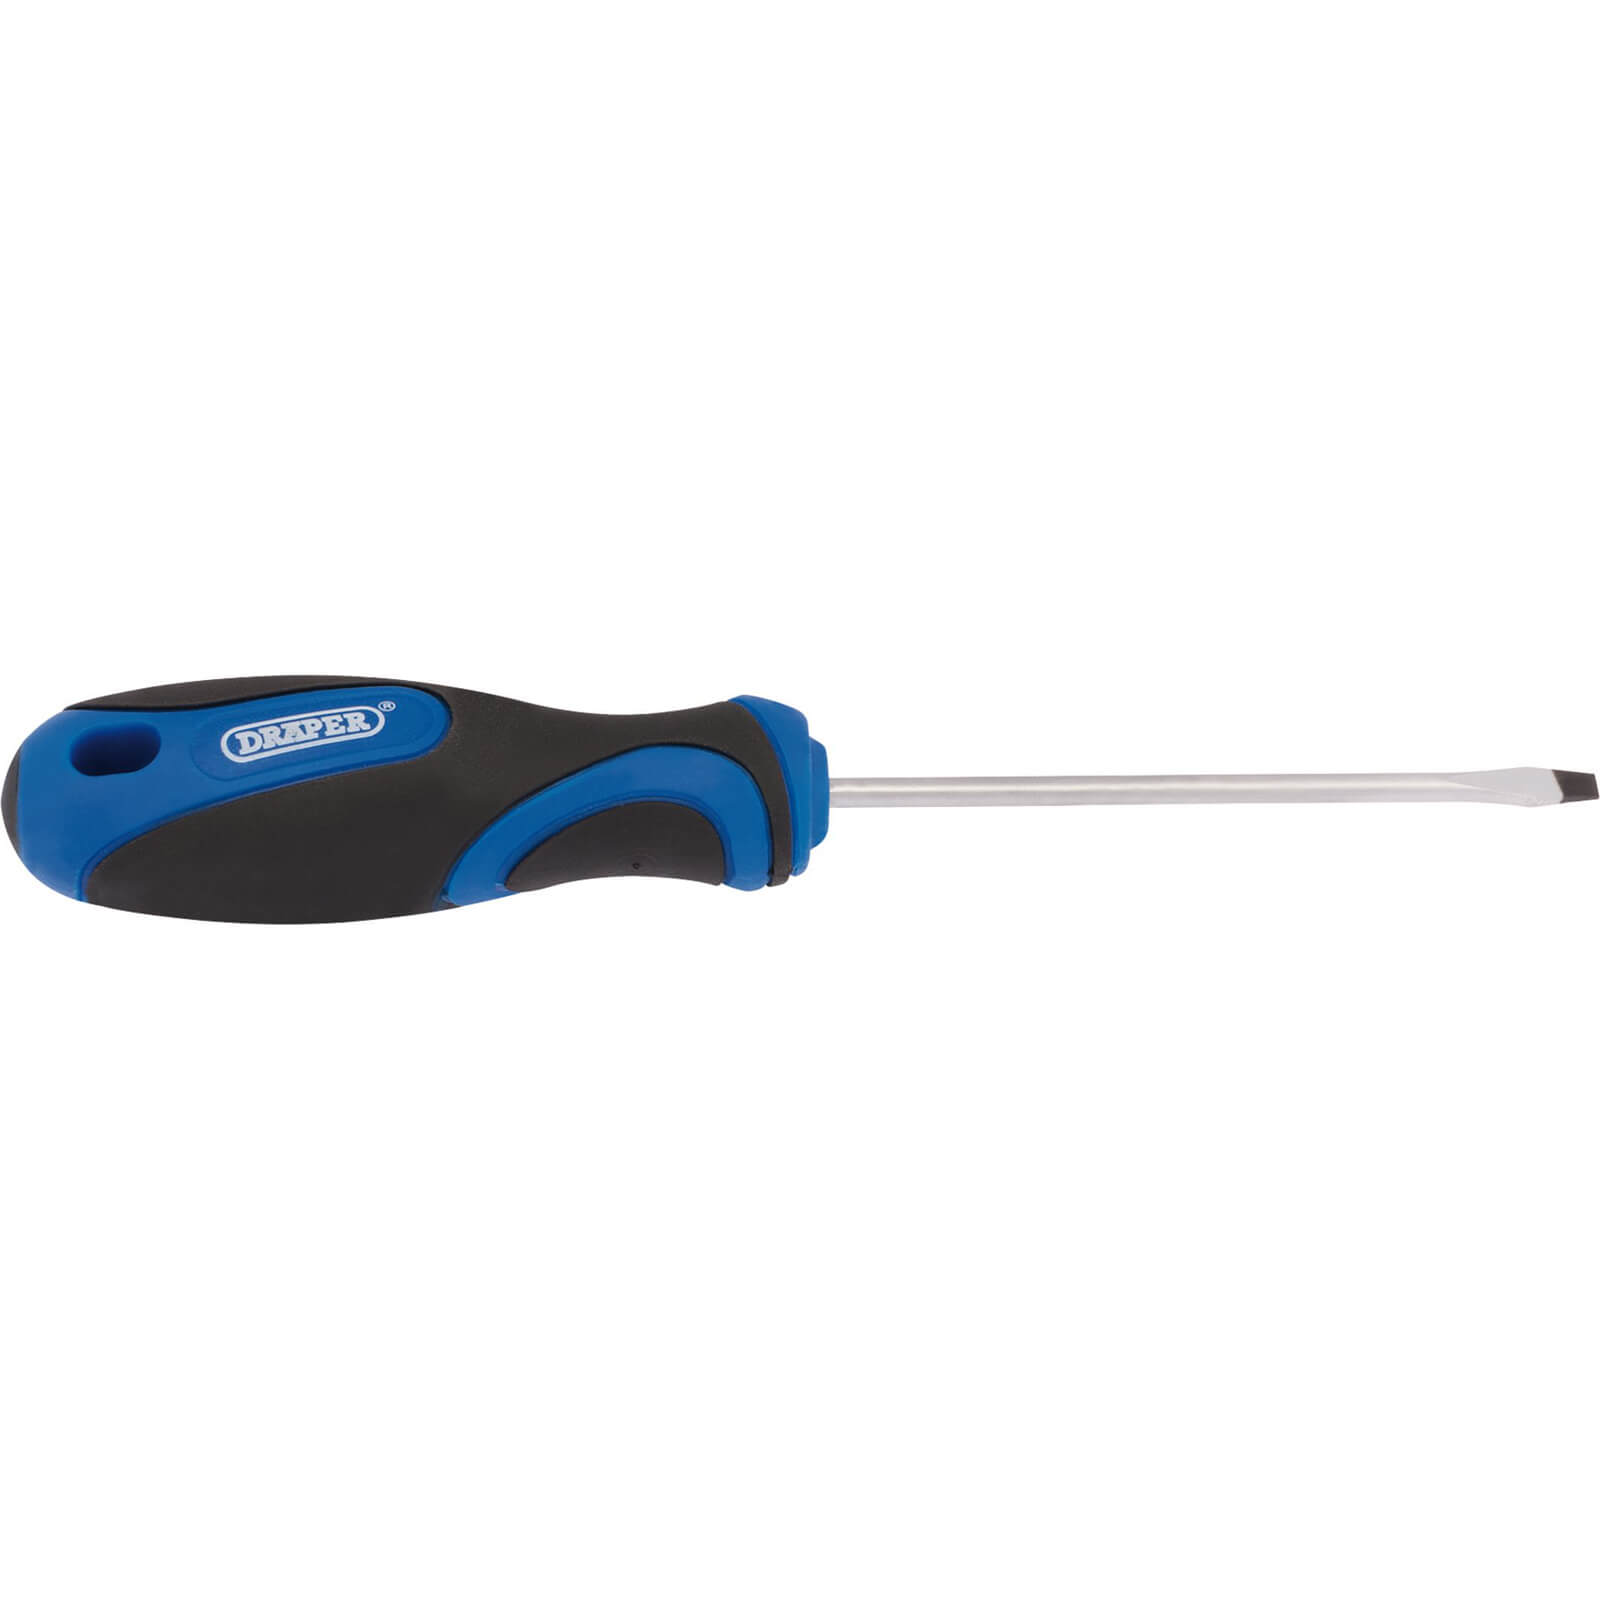 Photo of Draper Flared Slotted Screwdriver 3.2mm 75mm